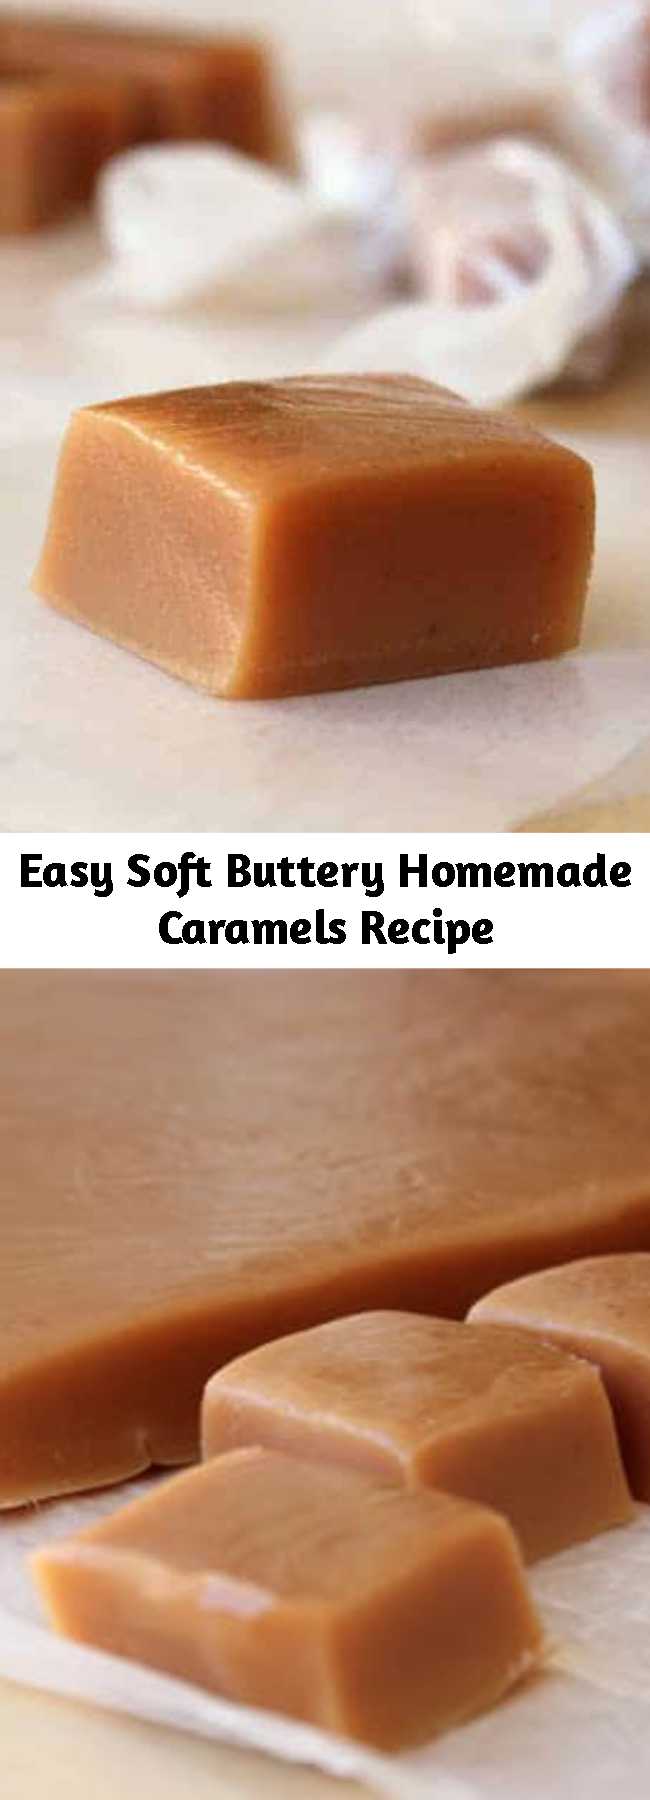 Easy Soft Buttery Homemade Caramels Recipe - Soft, buttery and perfect. A tried-and-true recipe you’ll want to make every Christmas.